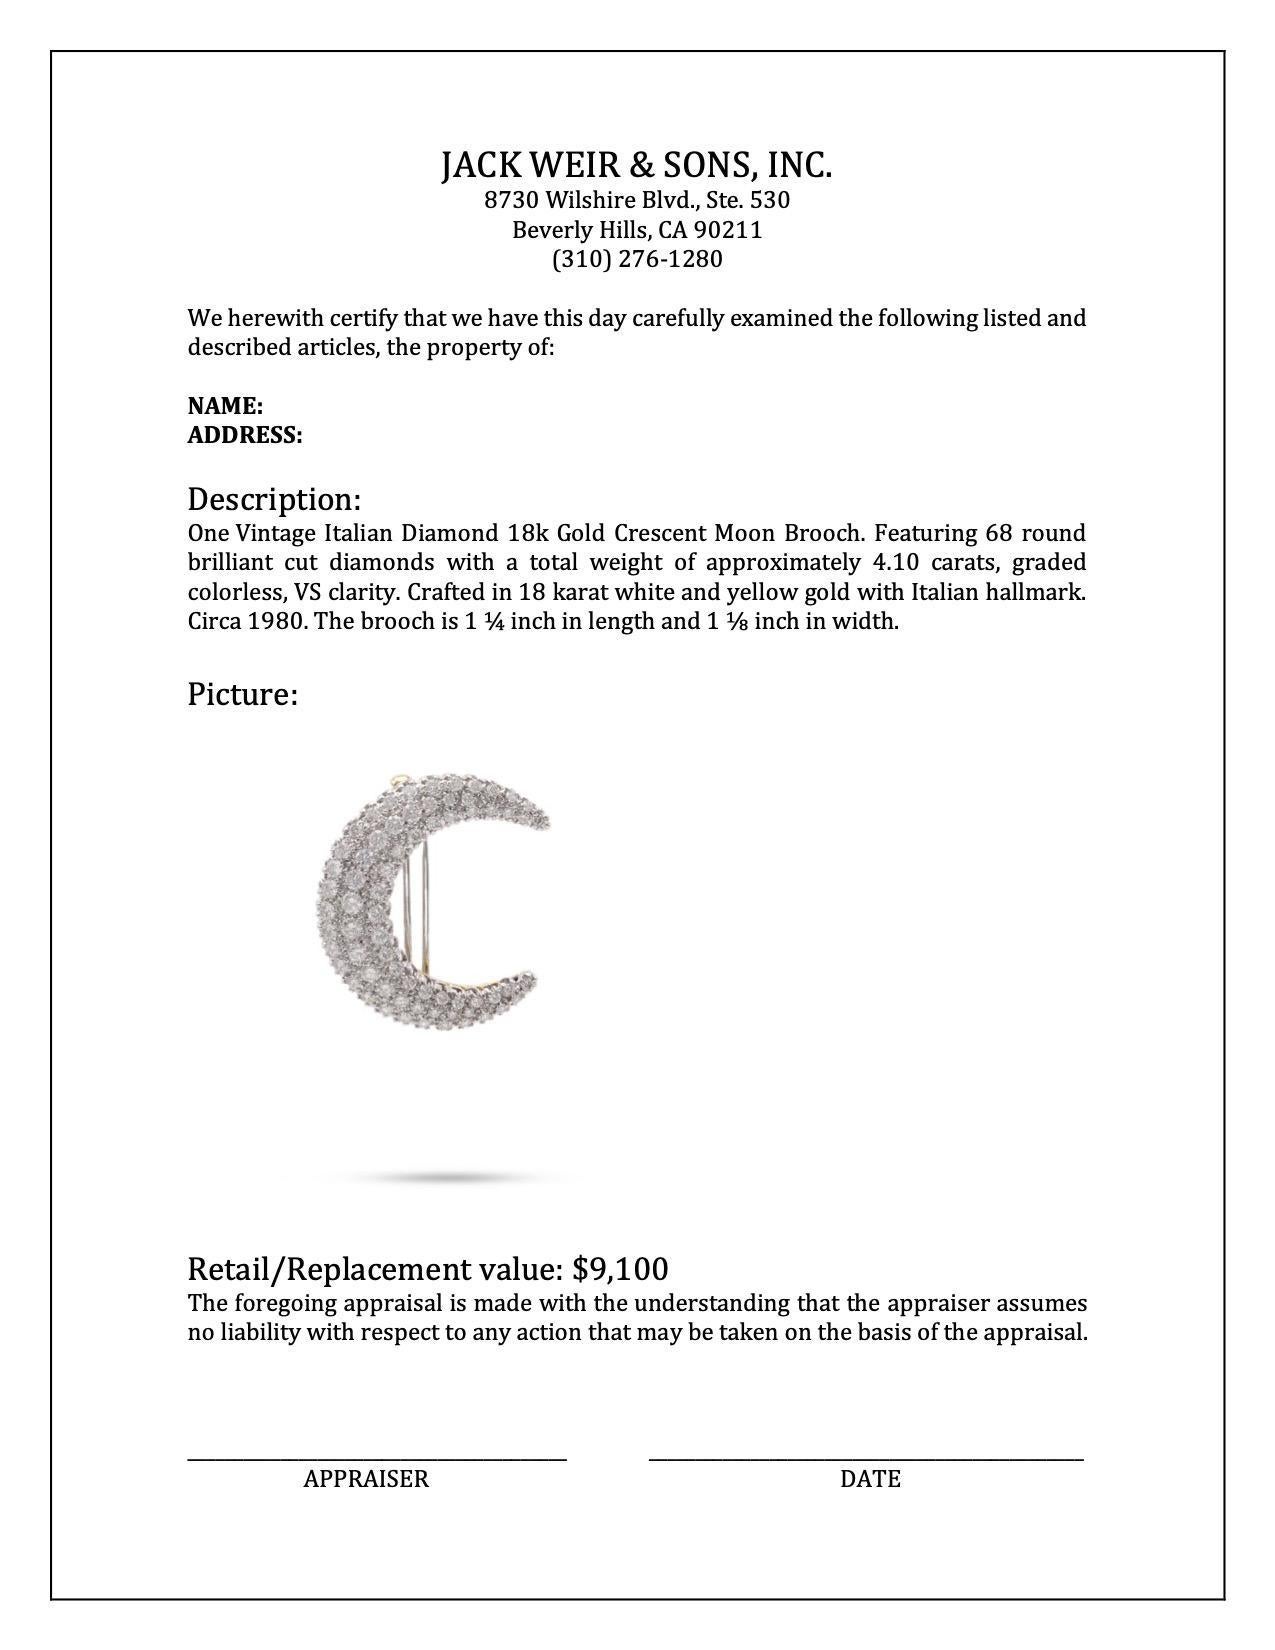 Vintage Italian Diamond 18k Gold Crescent Moon Brooch In Excellent Condition For Sale In Beverly Hills, CA